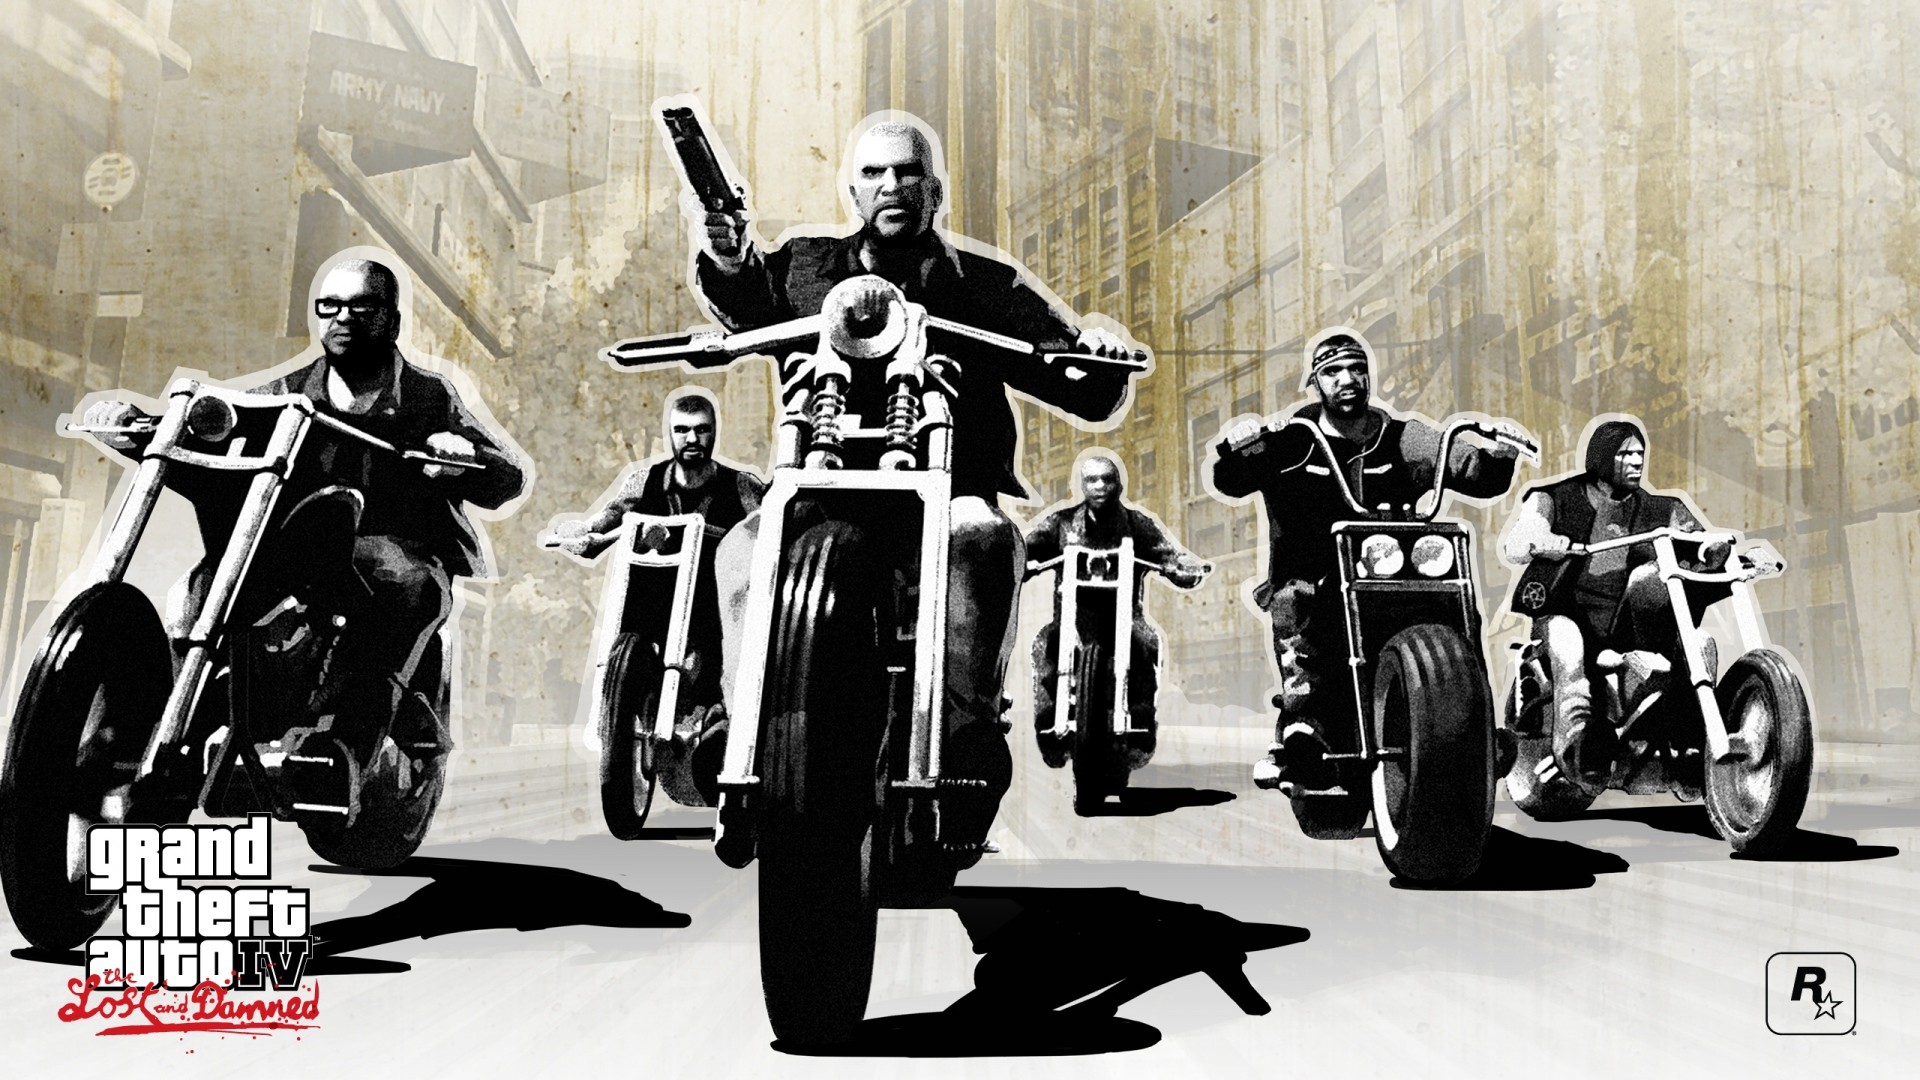 1920x1080 gta 4 lost and damned, grand theft auto 4 lost and damned, bikers